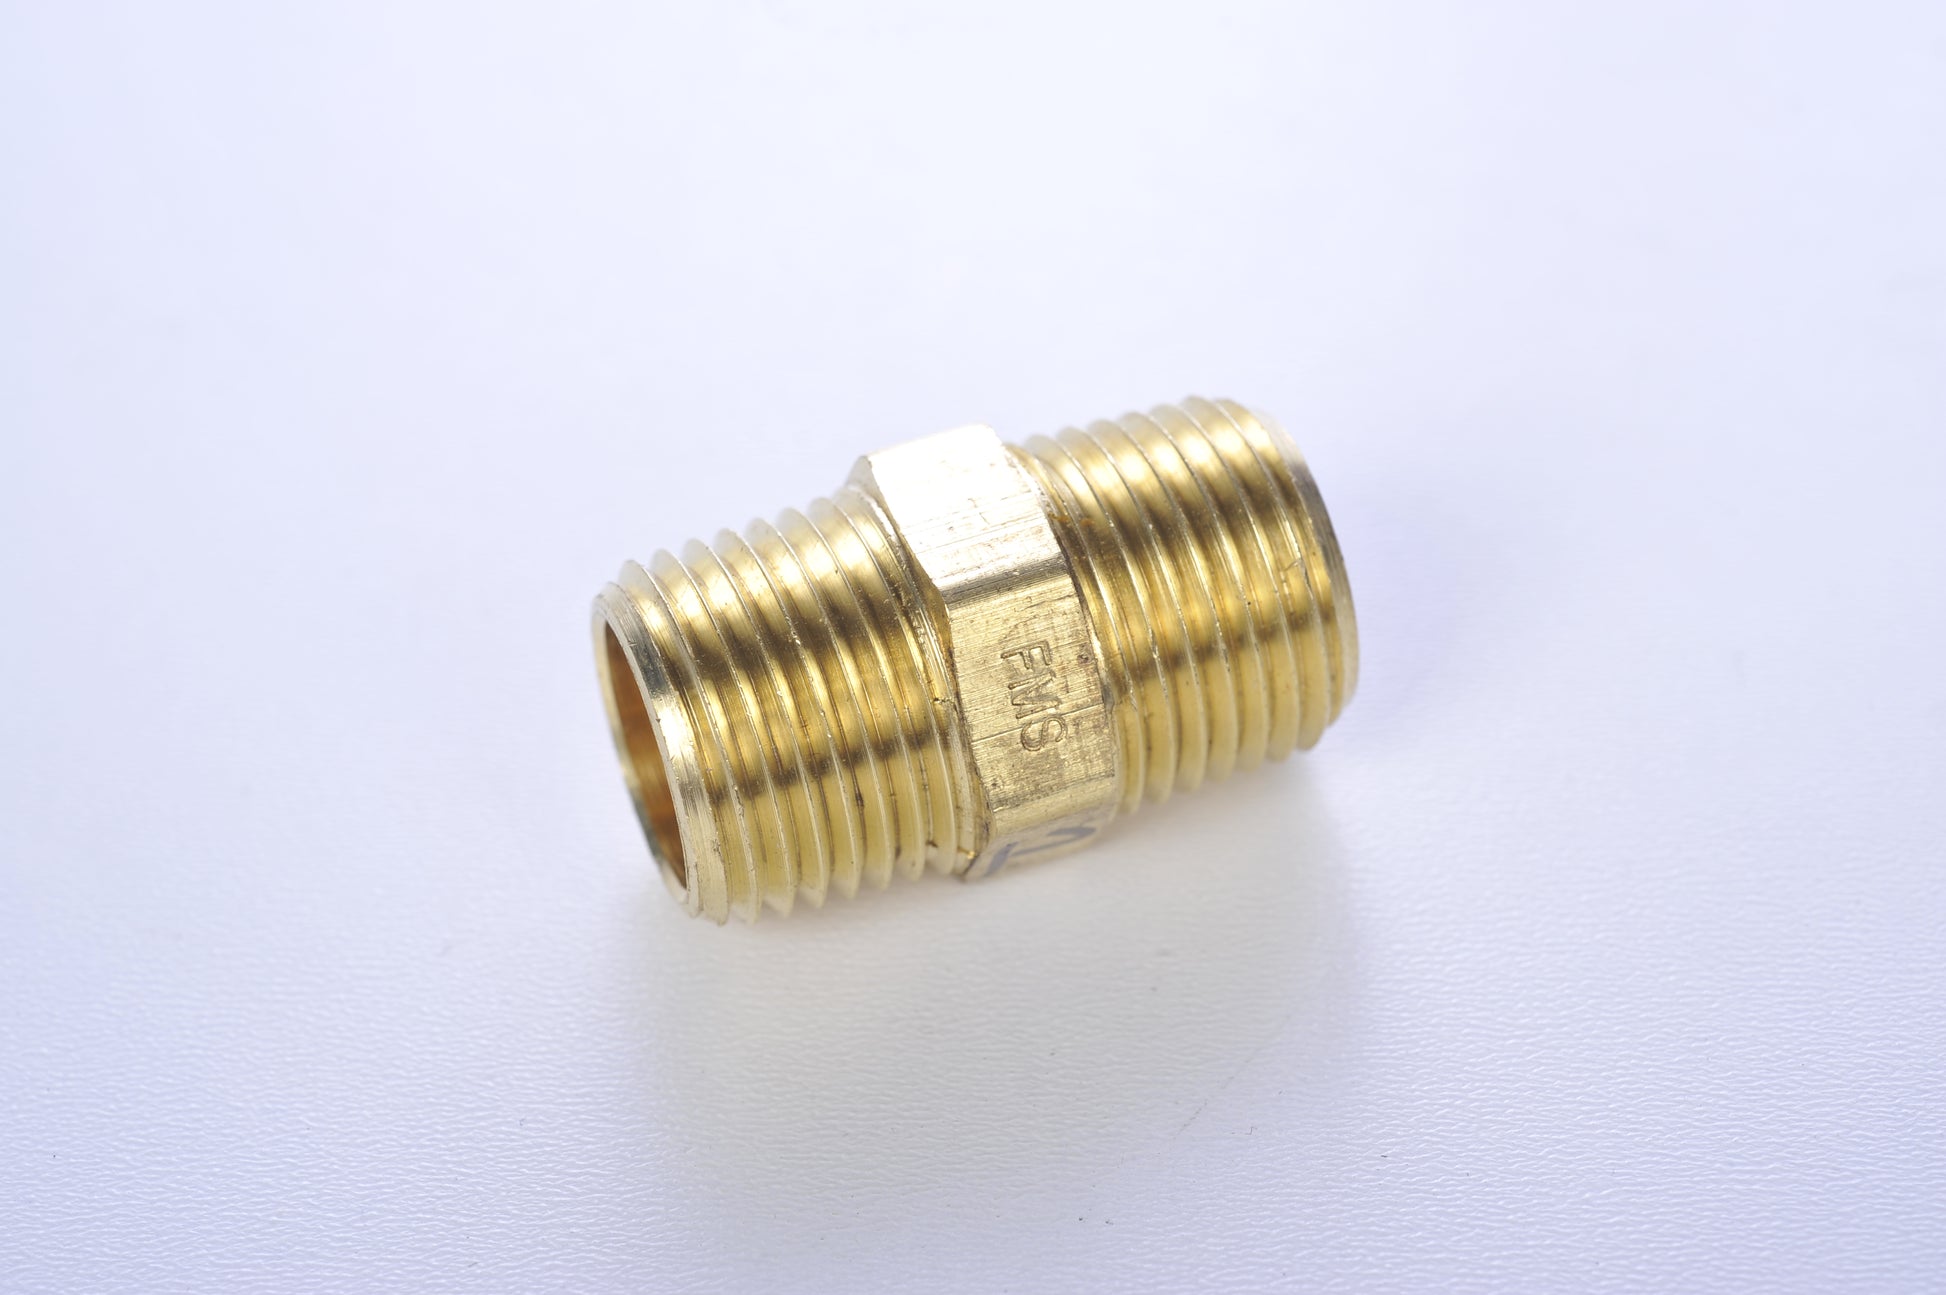 Brass Fitting - HMPHMP 1/2 Male to 1/2 Male Pipe